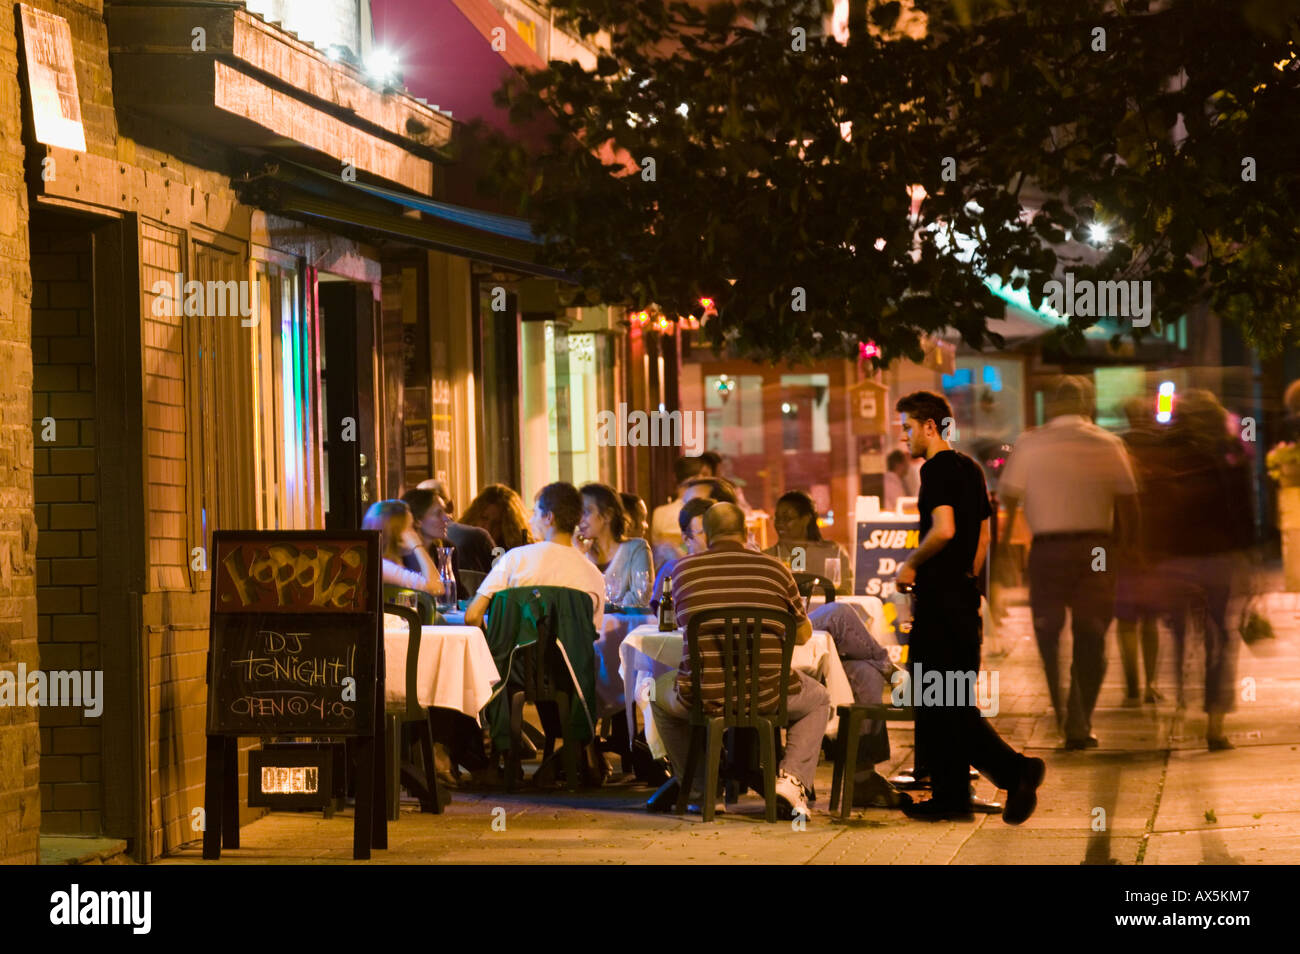 Group of friends at outdoor restaurant cafe Downtown Commons Ithaca New York Finger Lakes Region Stock Photo